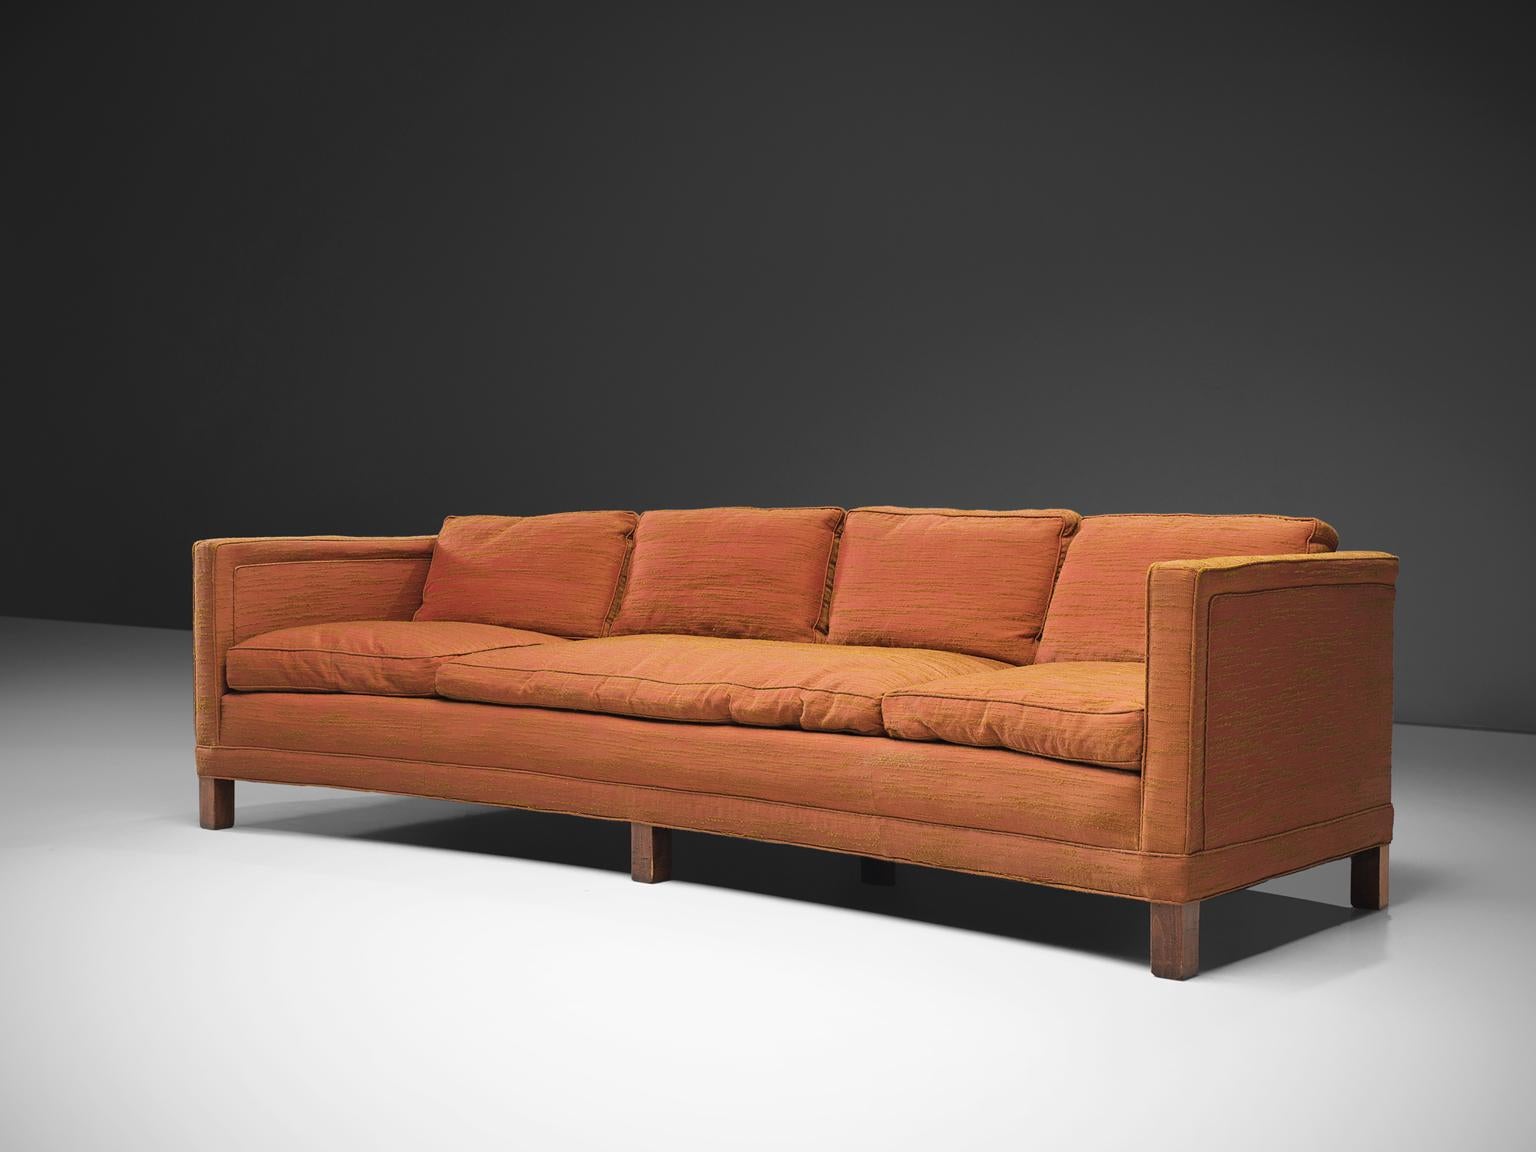 Dunbar sofa in orange fabric, United States, circa 1970s. 

This curved sofa has a particular upholstered fabric made with pink and ocre fibers, creating an interesting orange color. The sofa is made with four loose down filled back pillows and